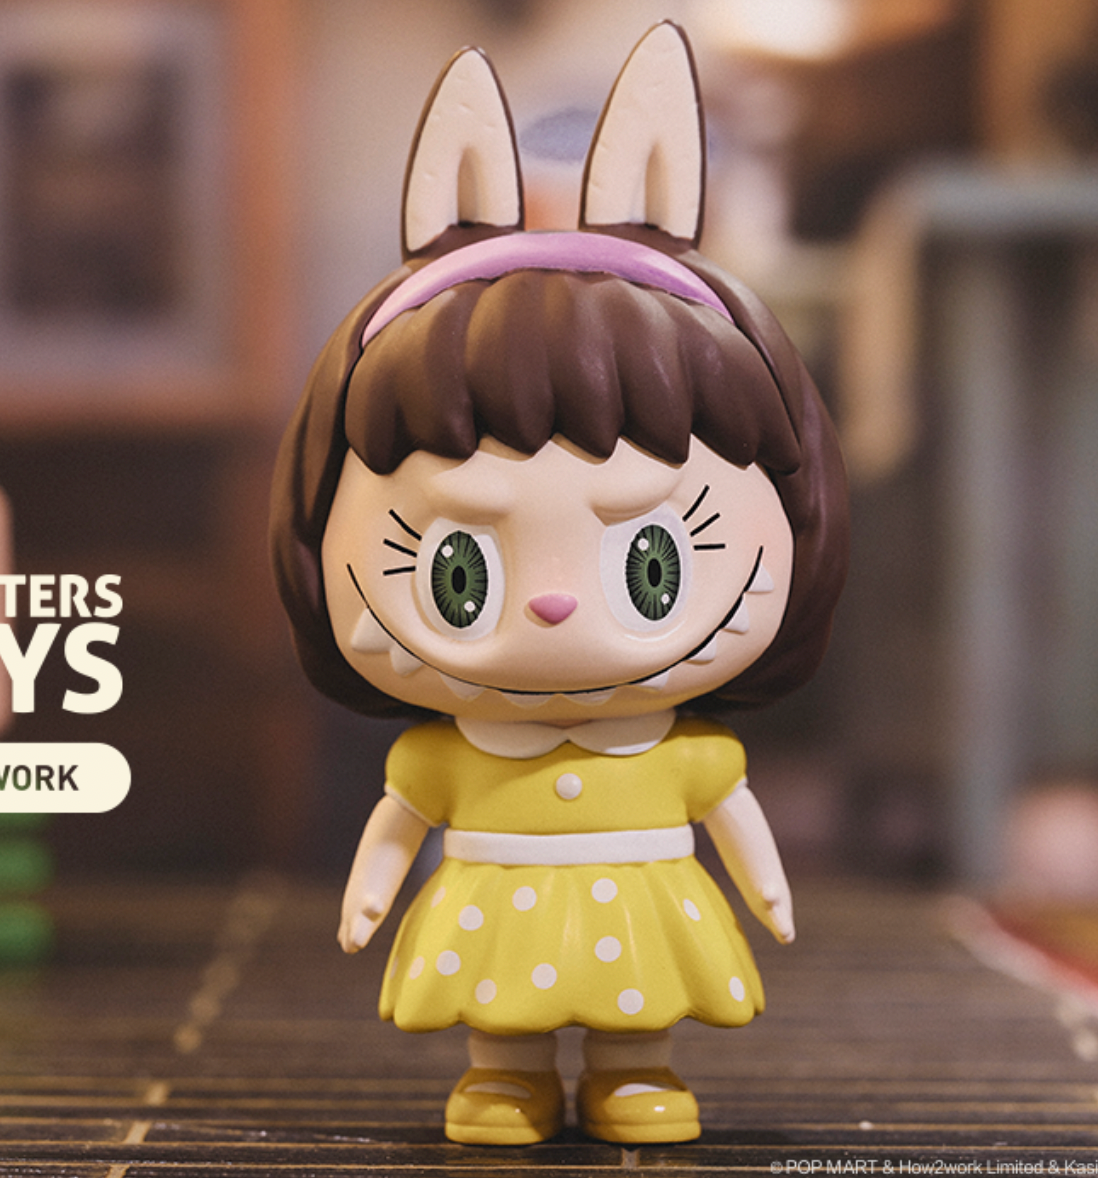 Dolly - The Monsters Toys by POP MART x How2work x Kasing Lung